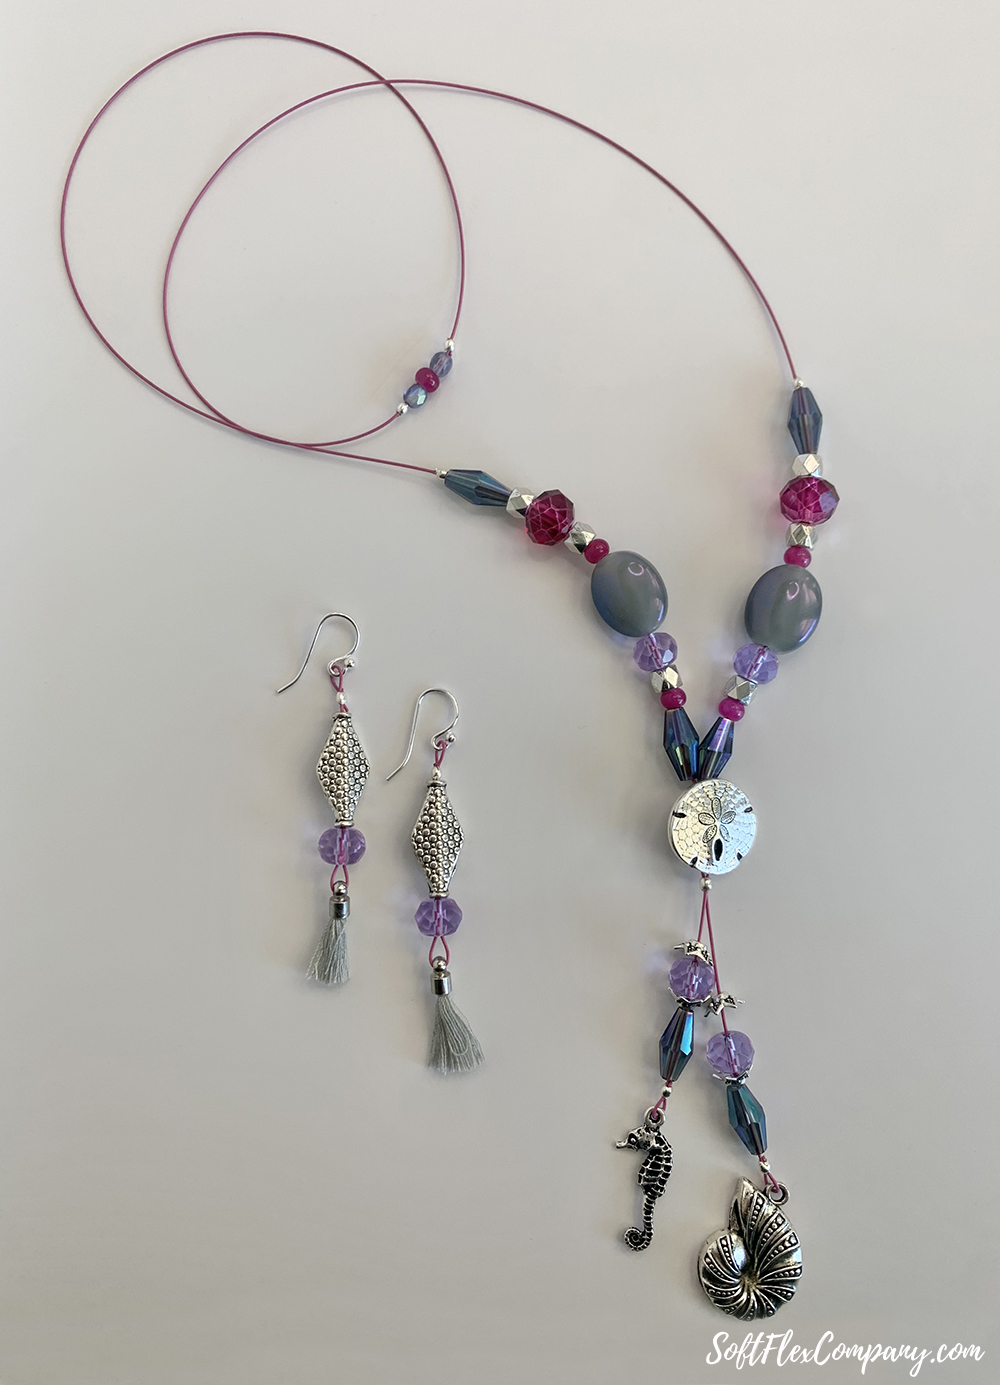 Resort Chic Necklace and Earrings by Sara Oehler